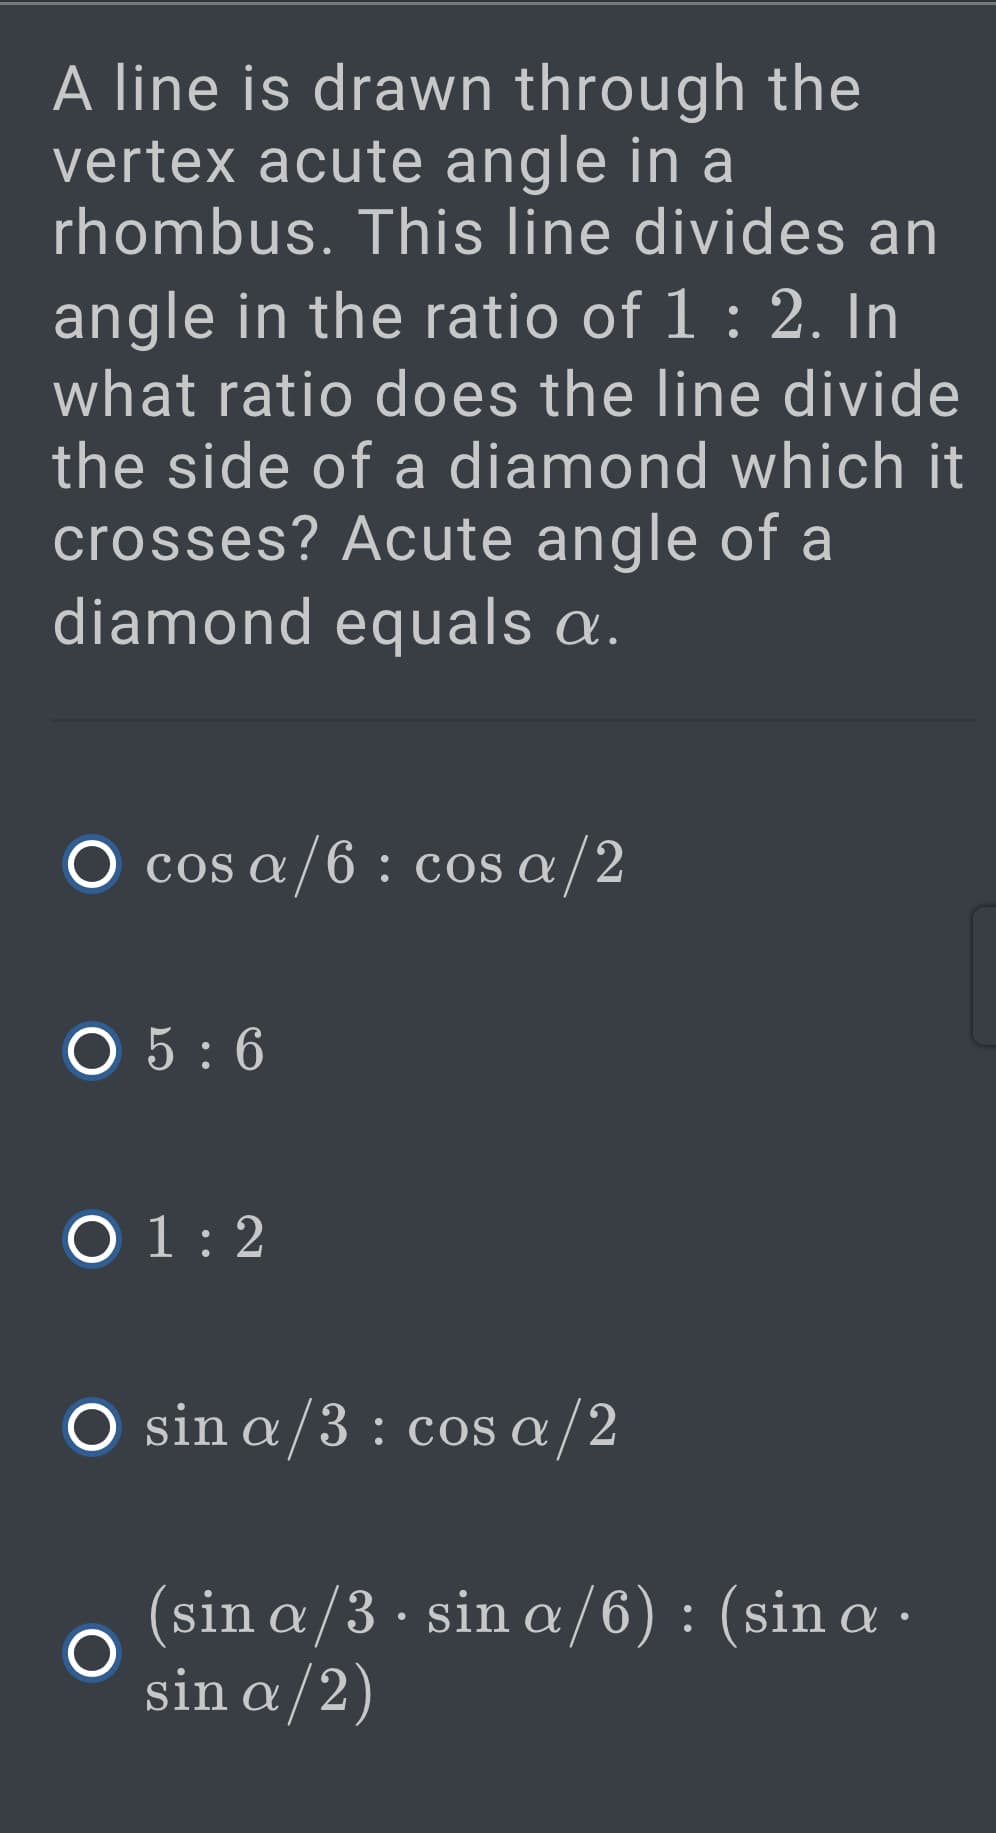 A line is drawn through the
vertex acute angle in a
rhombus. This line divides an
angle in the ratio of 1 : 2. In
what ratio does the line divide
the side of a diamond which it
crosses? Acute angle of a
diamond equals a.
O cos a/6 : cos a/2
О5:6
O 1: 2
O sin a/3 : cos a/2
(sin a/3 · sin a /6) : (sin a ·
sin a/2)
